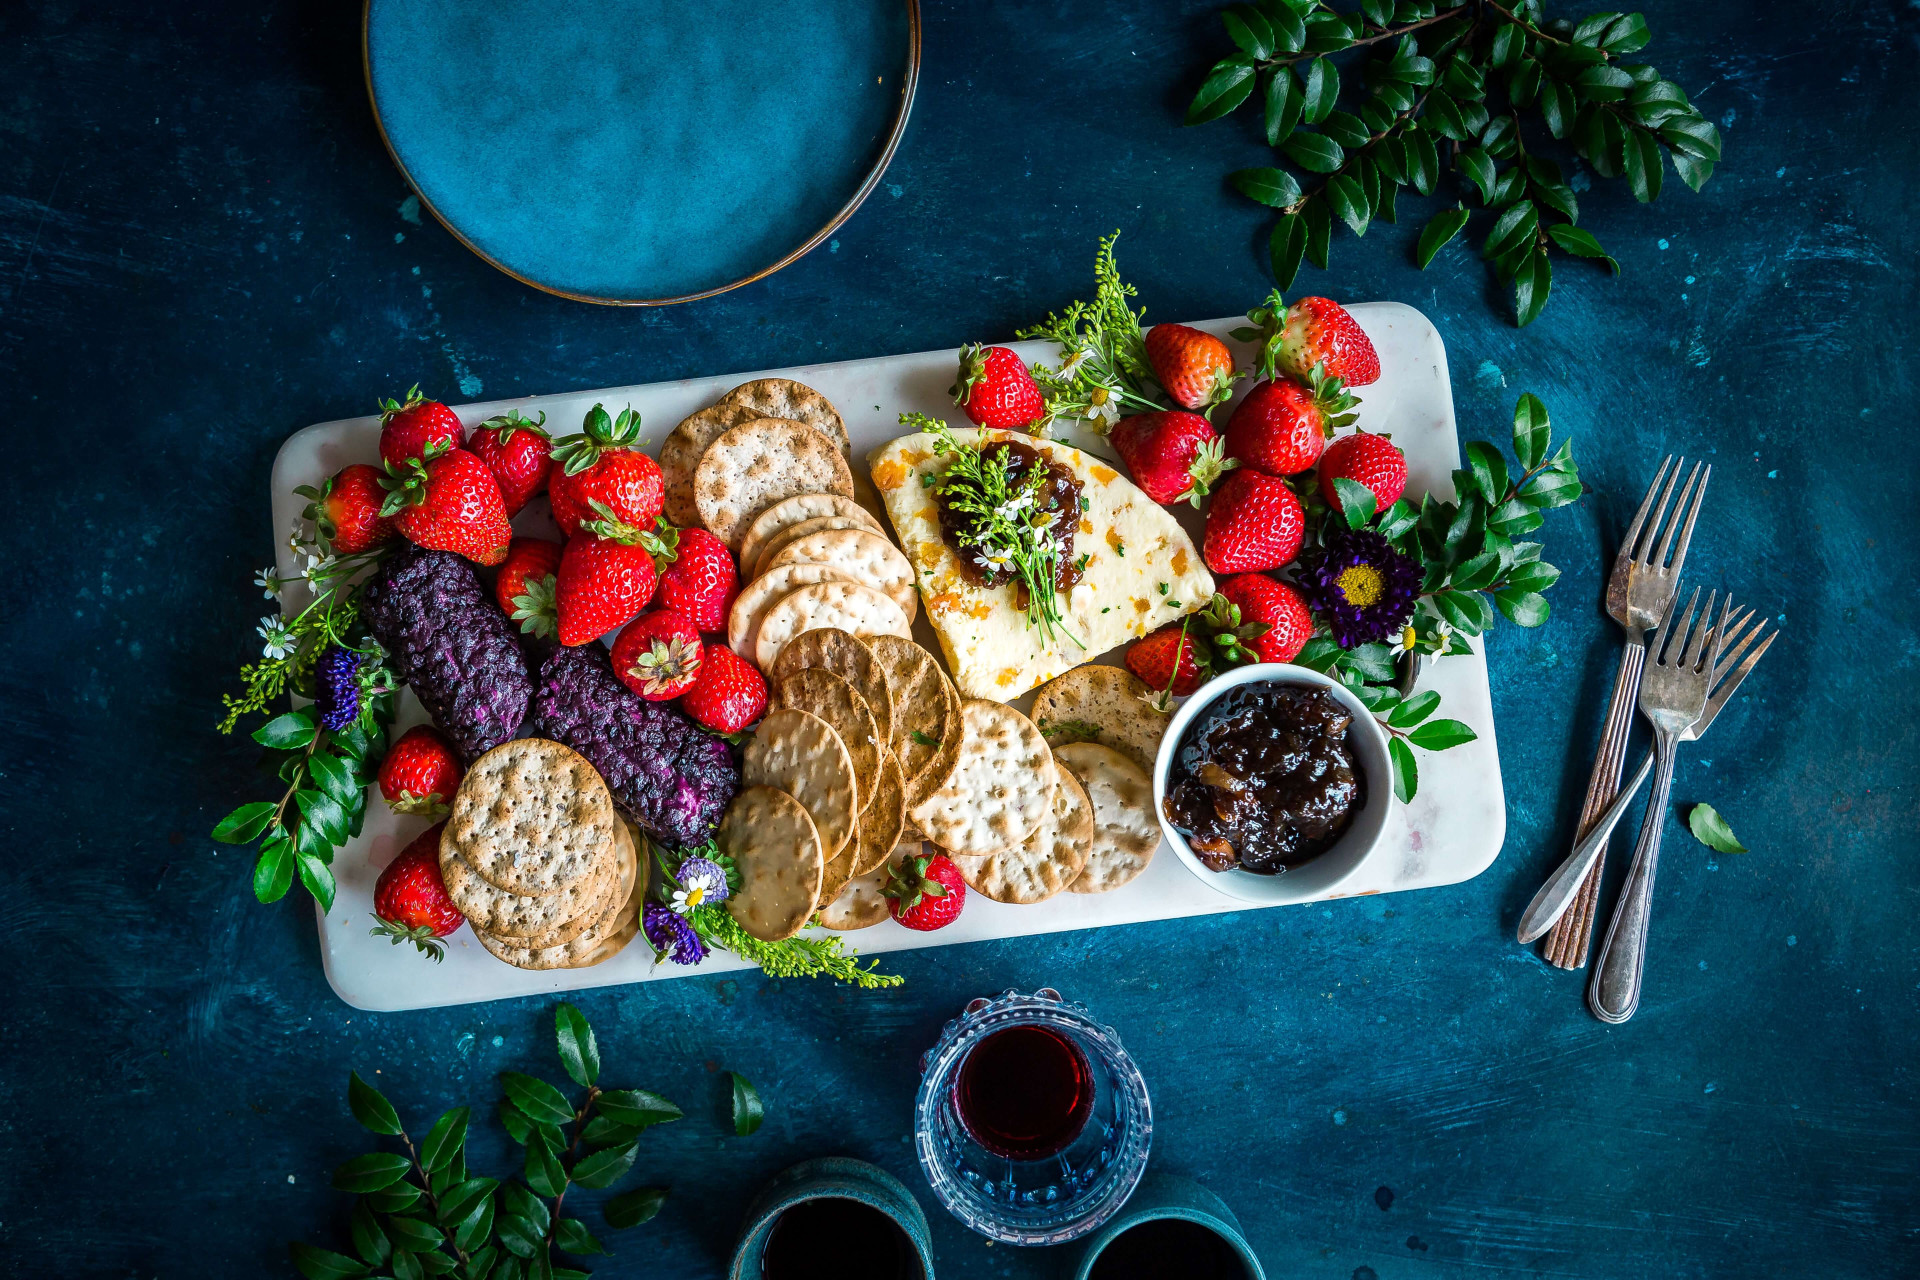 See where the restaurants of the Brazilian chef who was chosen as the best in Latin America are located; you will fall in love! (Images: Unsplash)